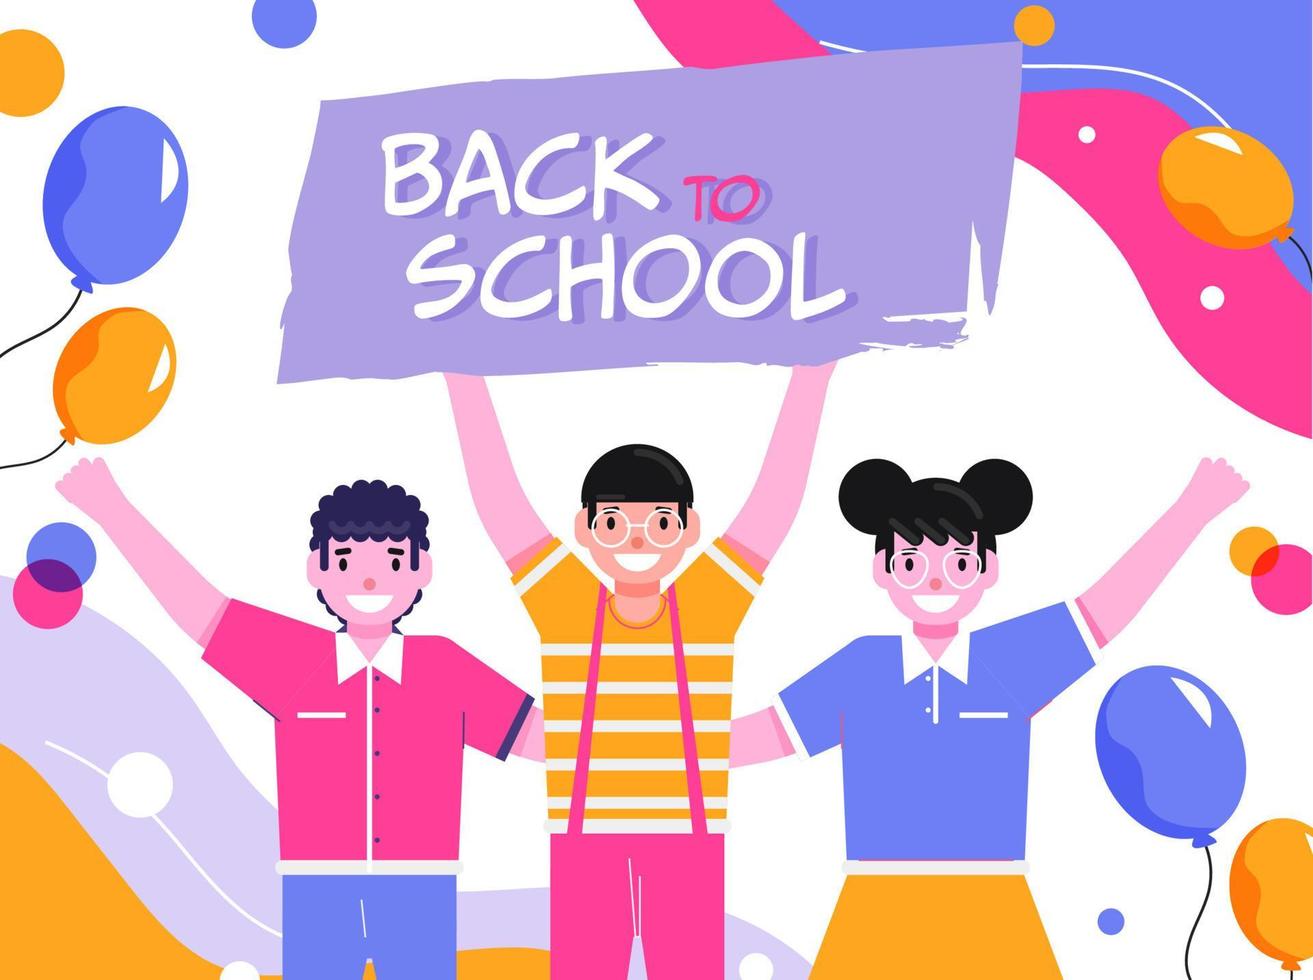 Back To School Text with Cheerful Student Kids and Balloons on Abstract Background. vector